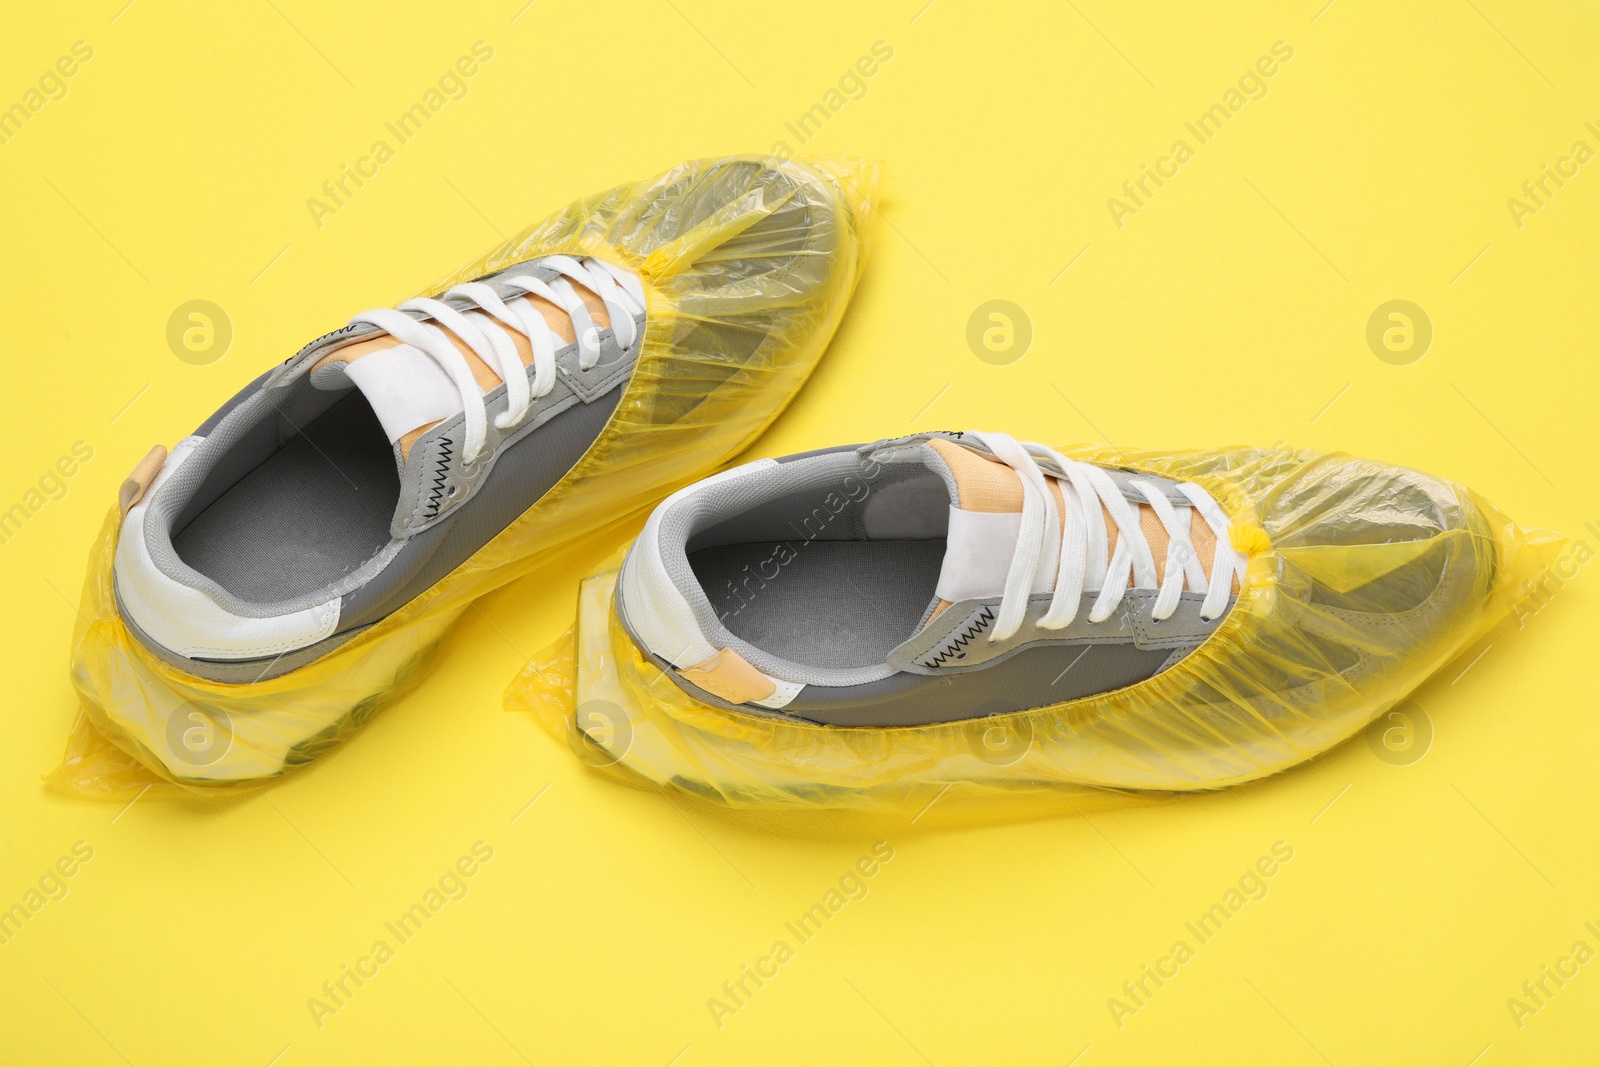 Photo of Sneakers in shoe covers on yellow background, closeup